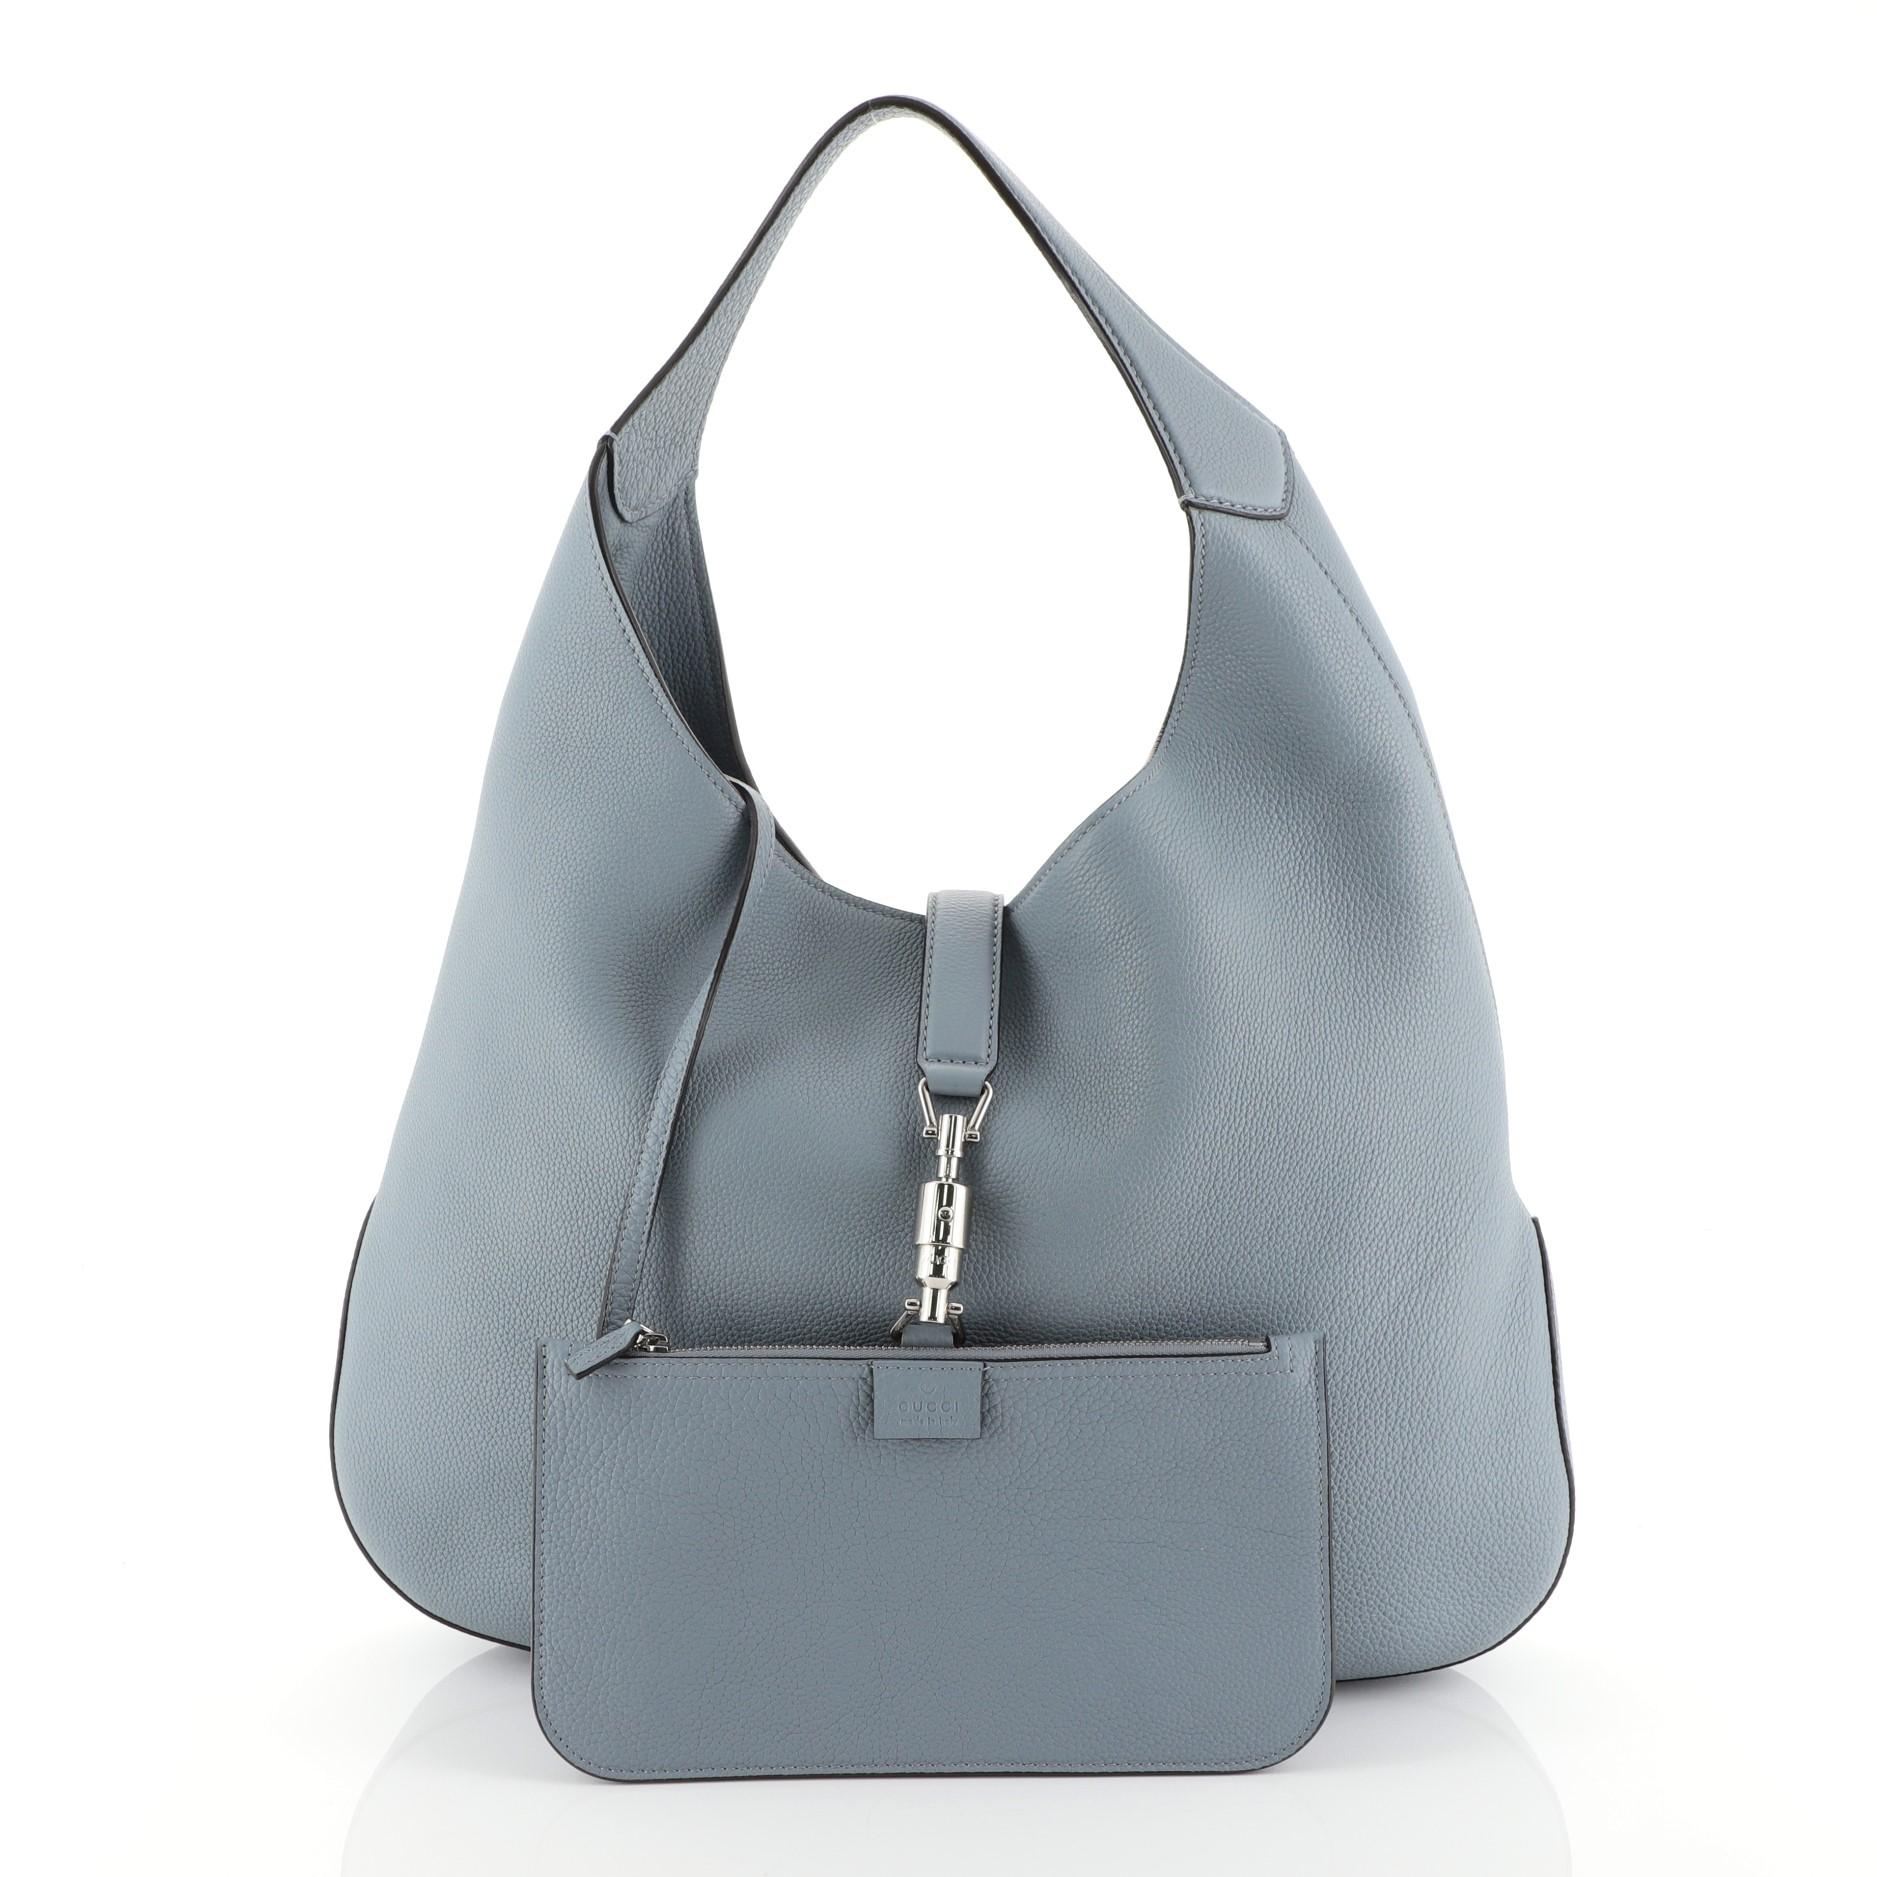 This Gucci Jackie Soft Hobo Leather, crafted from blue leather, features a single loop leather handle and silver-tone hardware. Its piston lock closure opens to a blue suede interior. 

Estimated Retail Price: $2,990
Condition: Excellent. Minimal